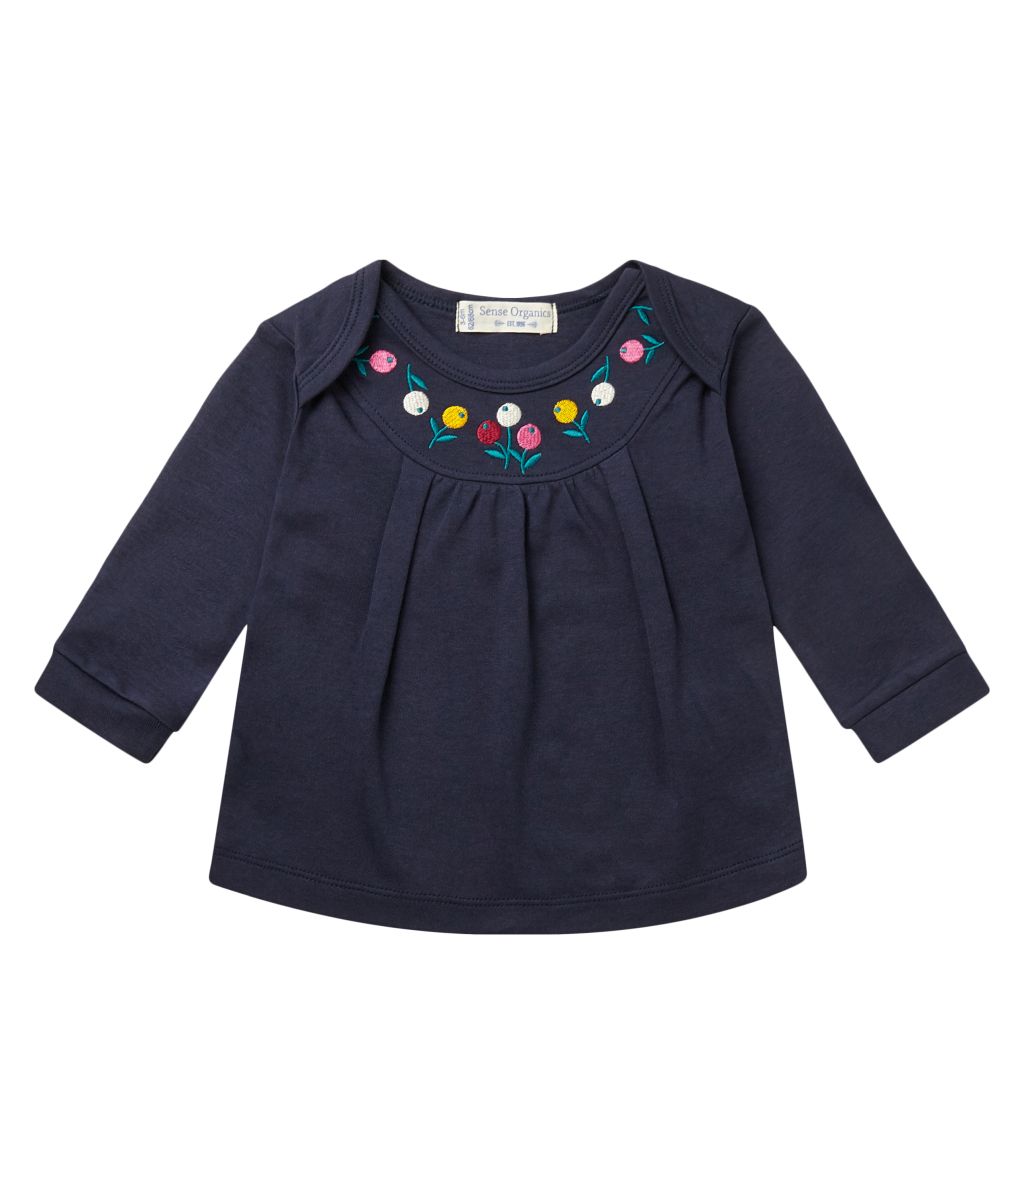 Luisa Baby Shirt L/S navy+flower embroidery 92